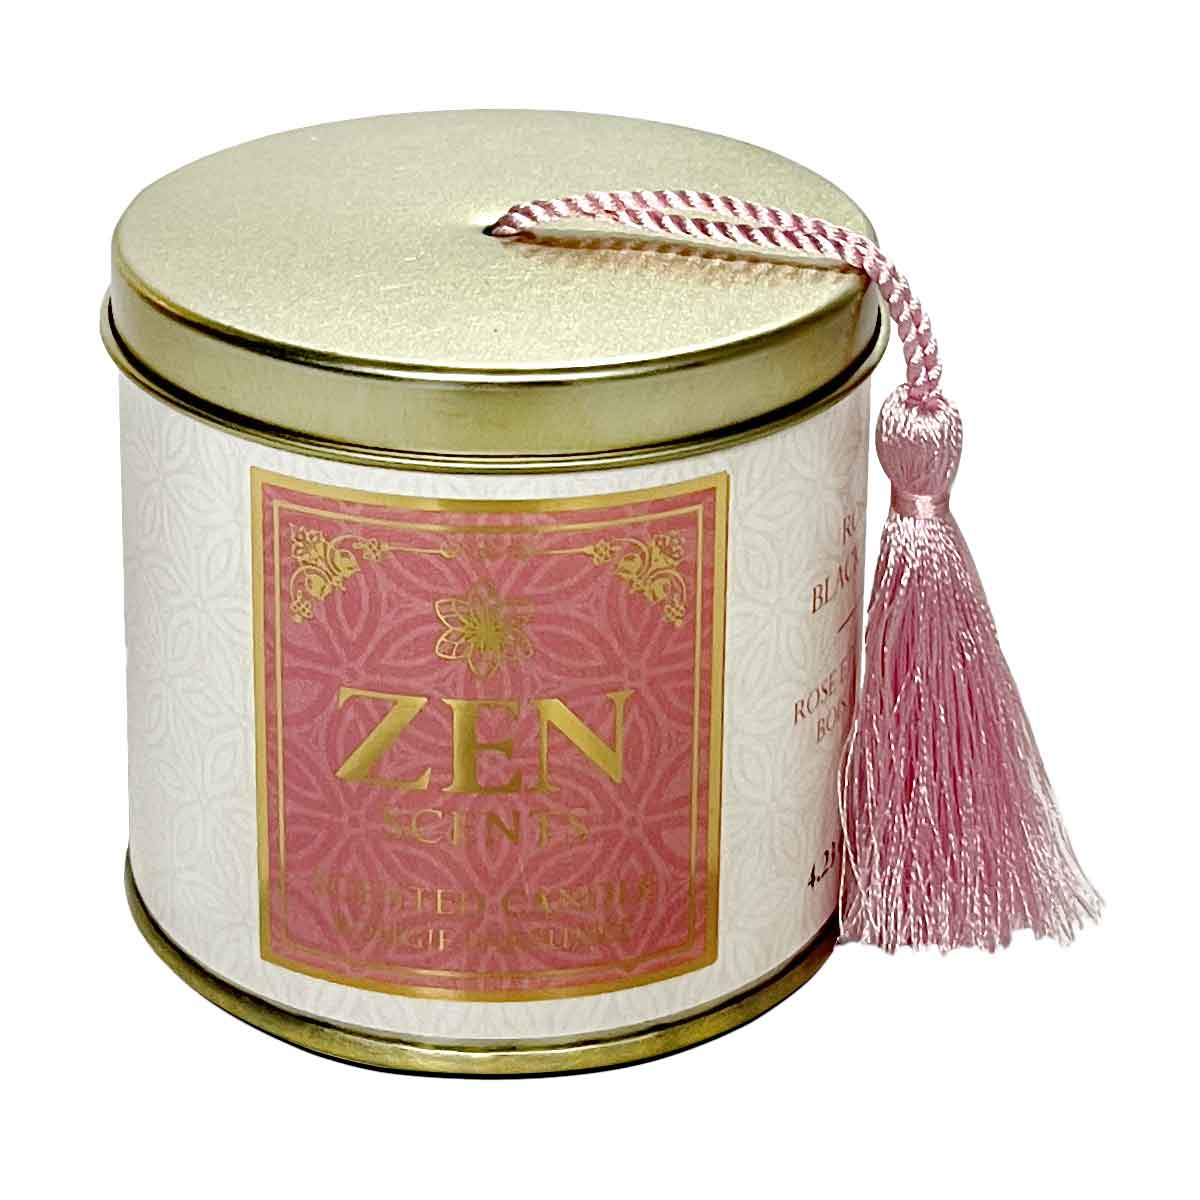 Zen Soy Wax Scented Votive Candles